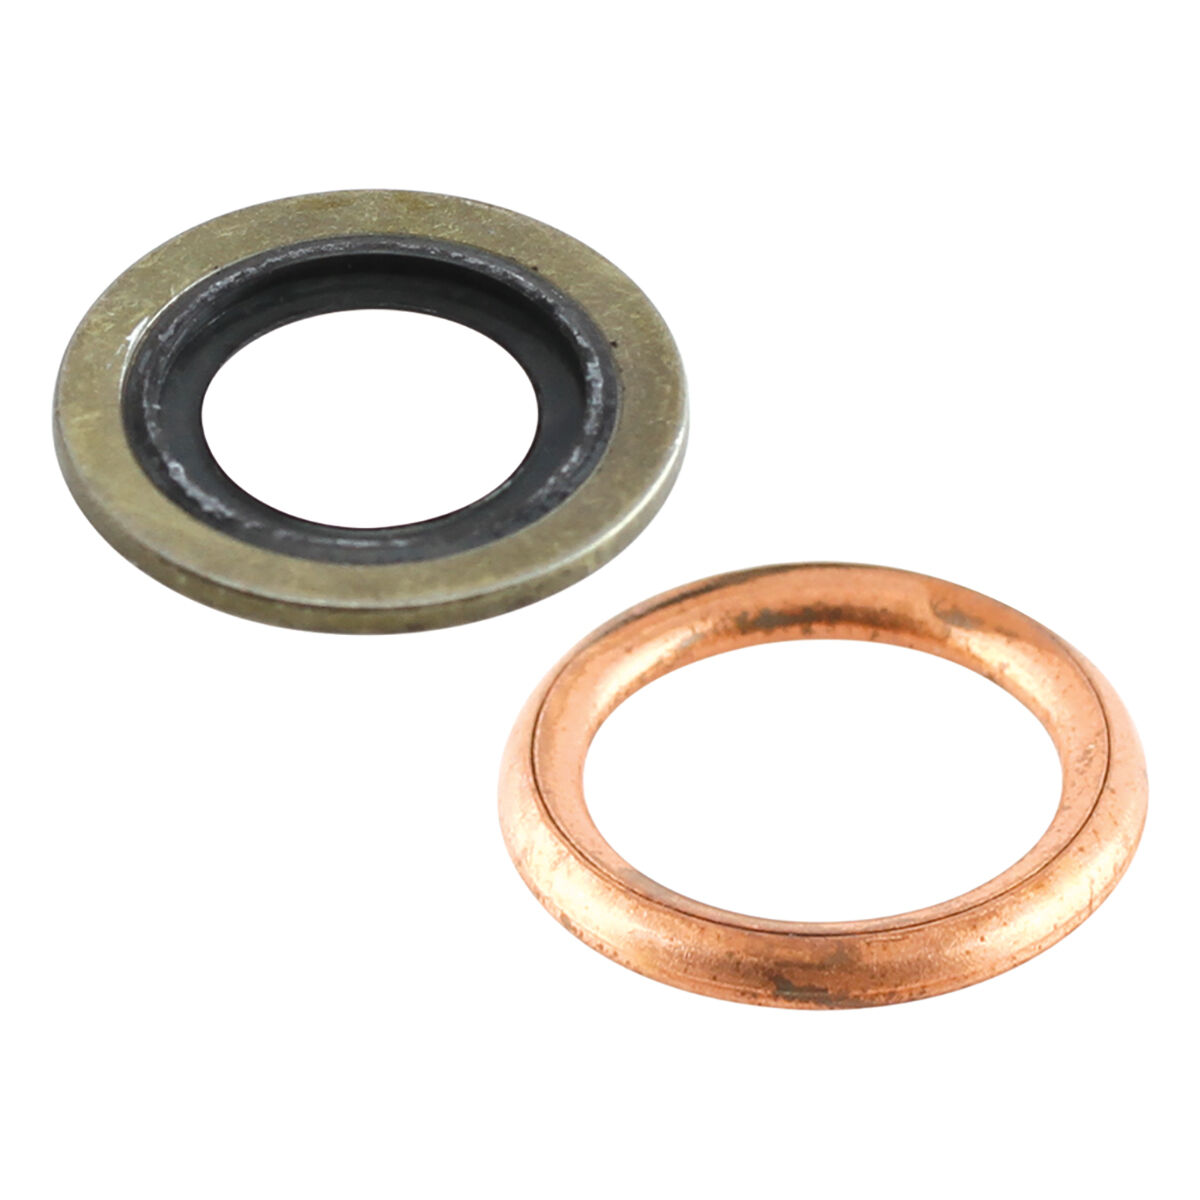 D2P 31327 313.27 Oil Sump Plug Washers 